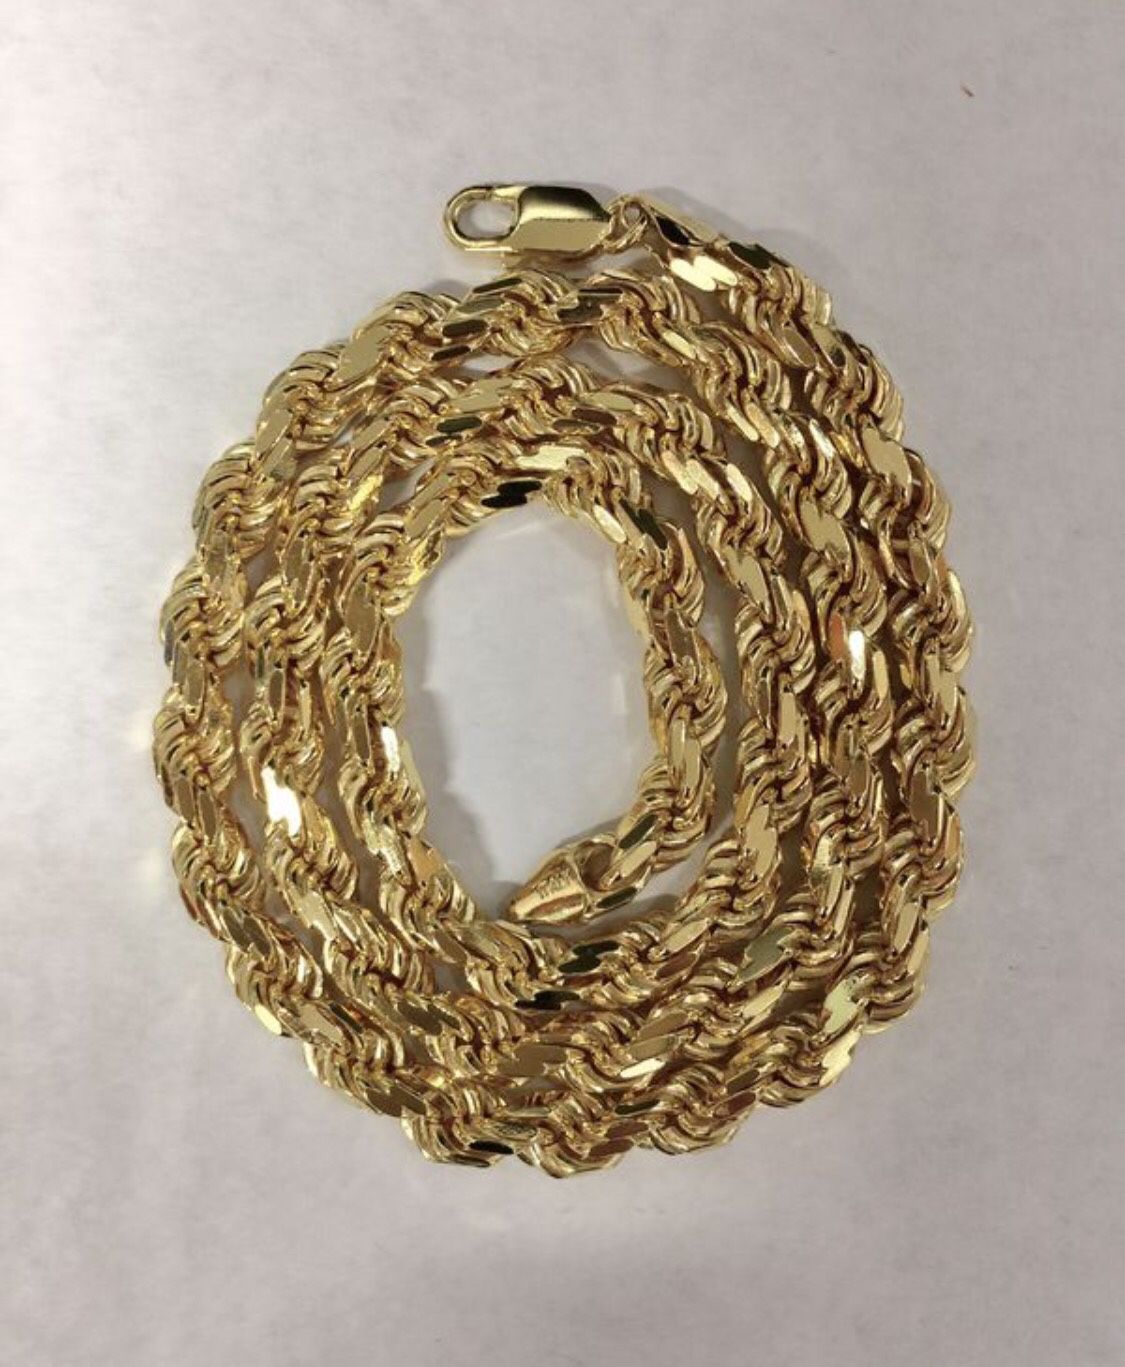 Louis Vuitton Chain Link Necklace for Sale in Santa Ana, CA - OfferUp